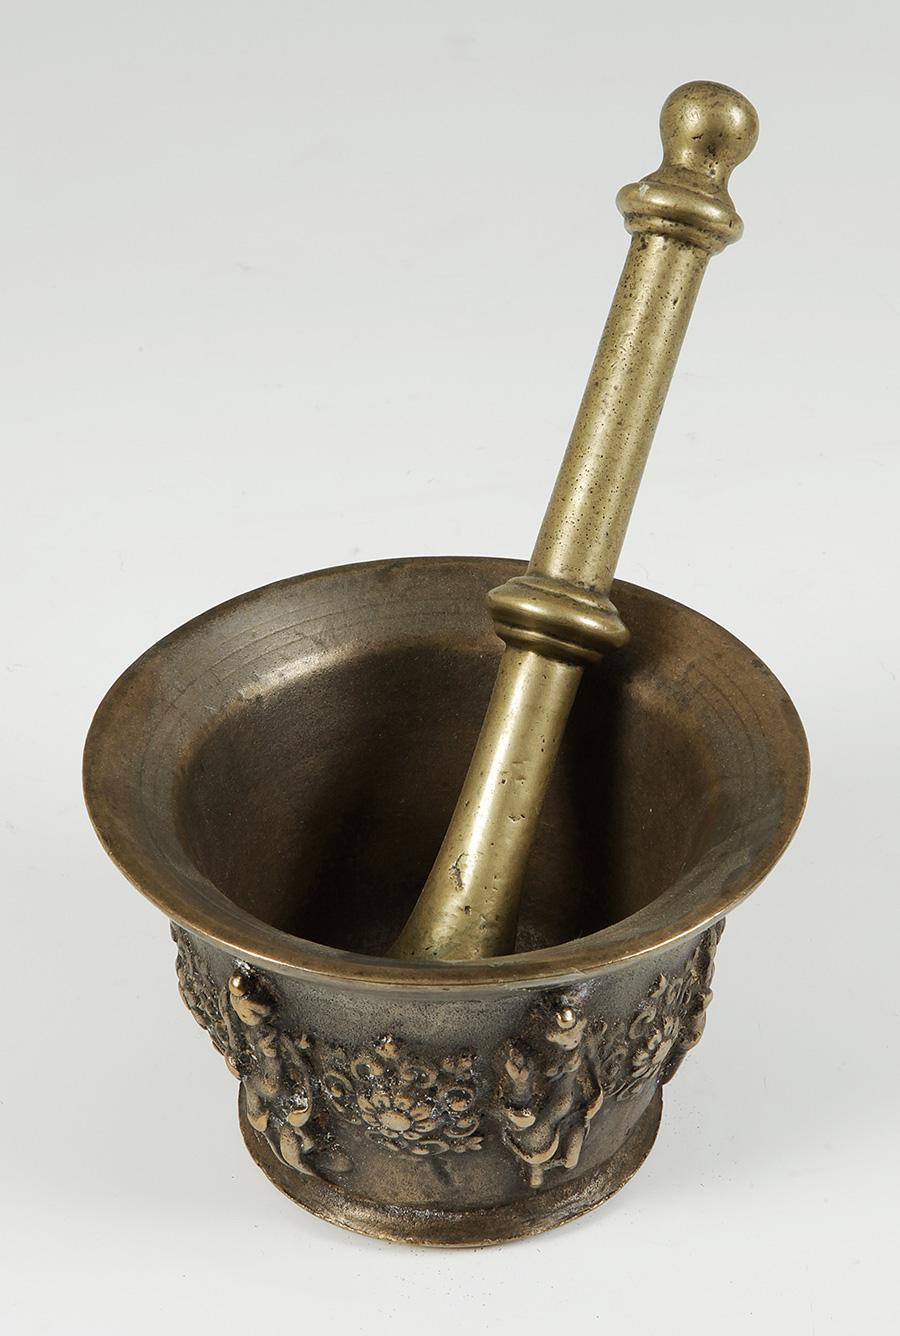 Mortar in bronze of Baroque epoch, with structure in the shape of inverted bell with circular flat base and open mouth. It is decorated with Classic female figures, alternated with rosettes bordered by tornapuntas, which fulfill the function of the